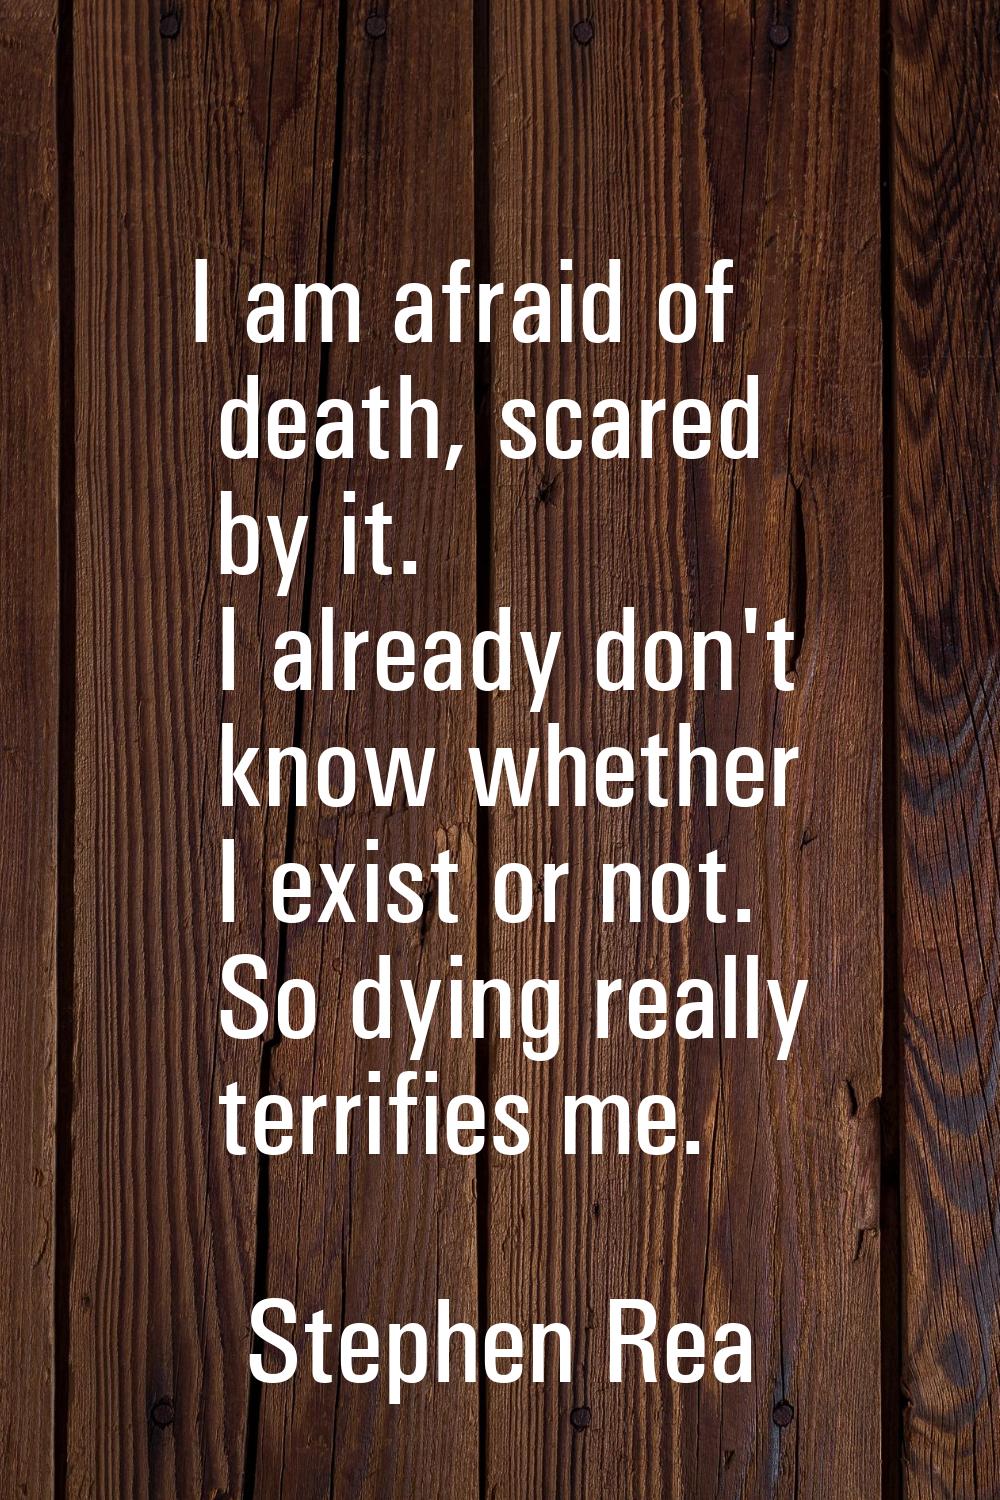 I am afraid of death, scared by it. I already don't know whether I exist or not. So dying really te